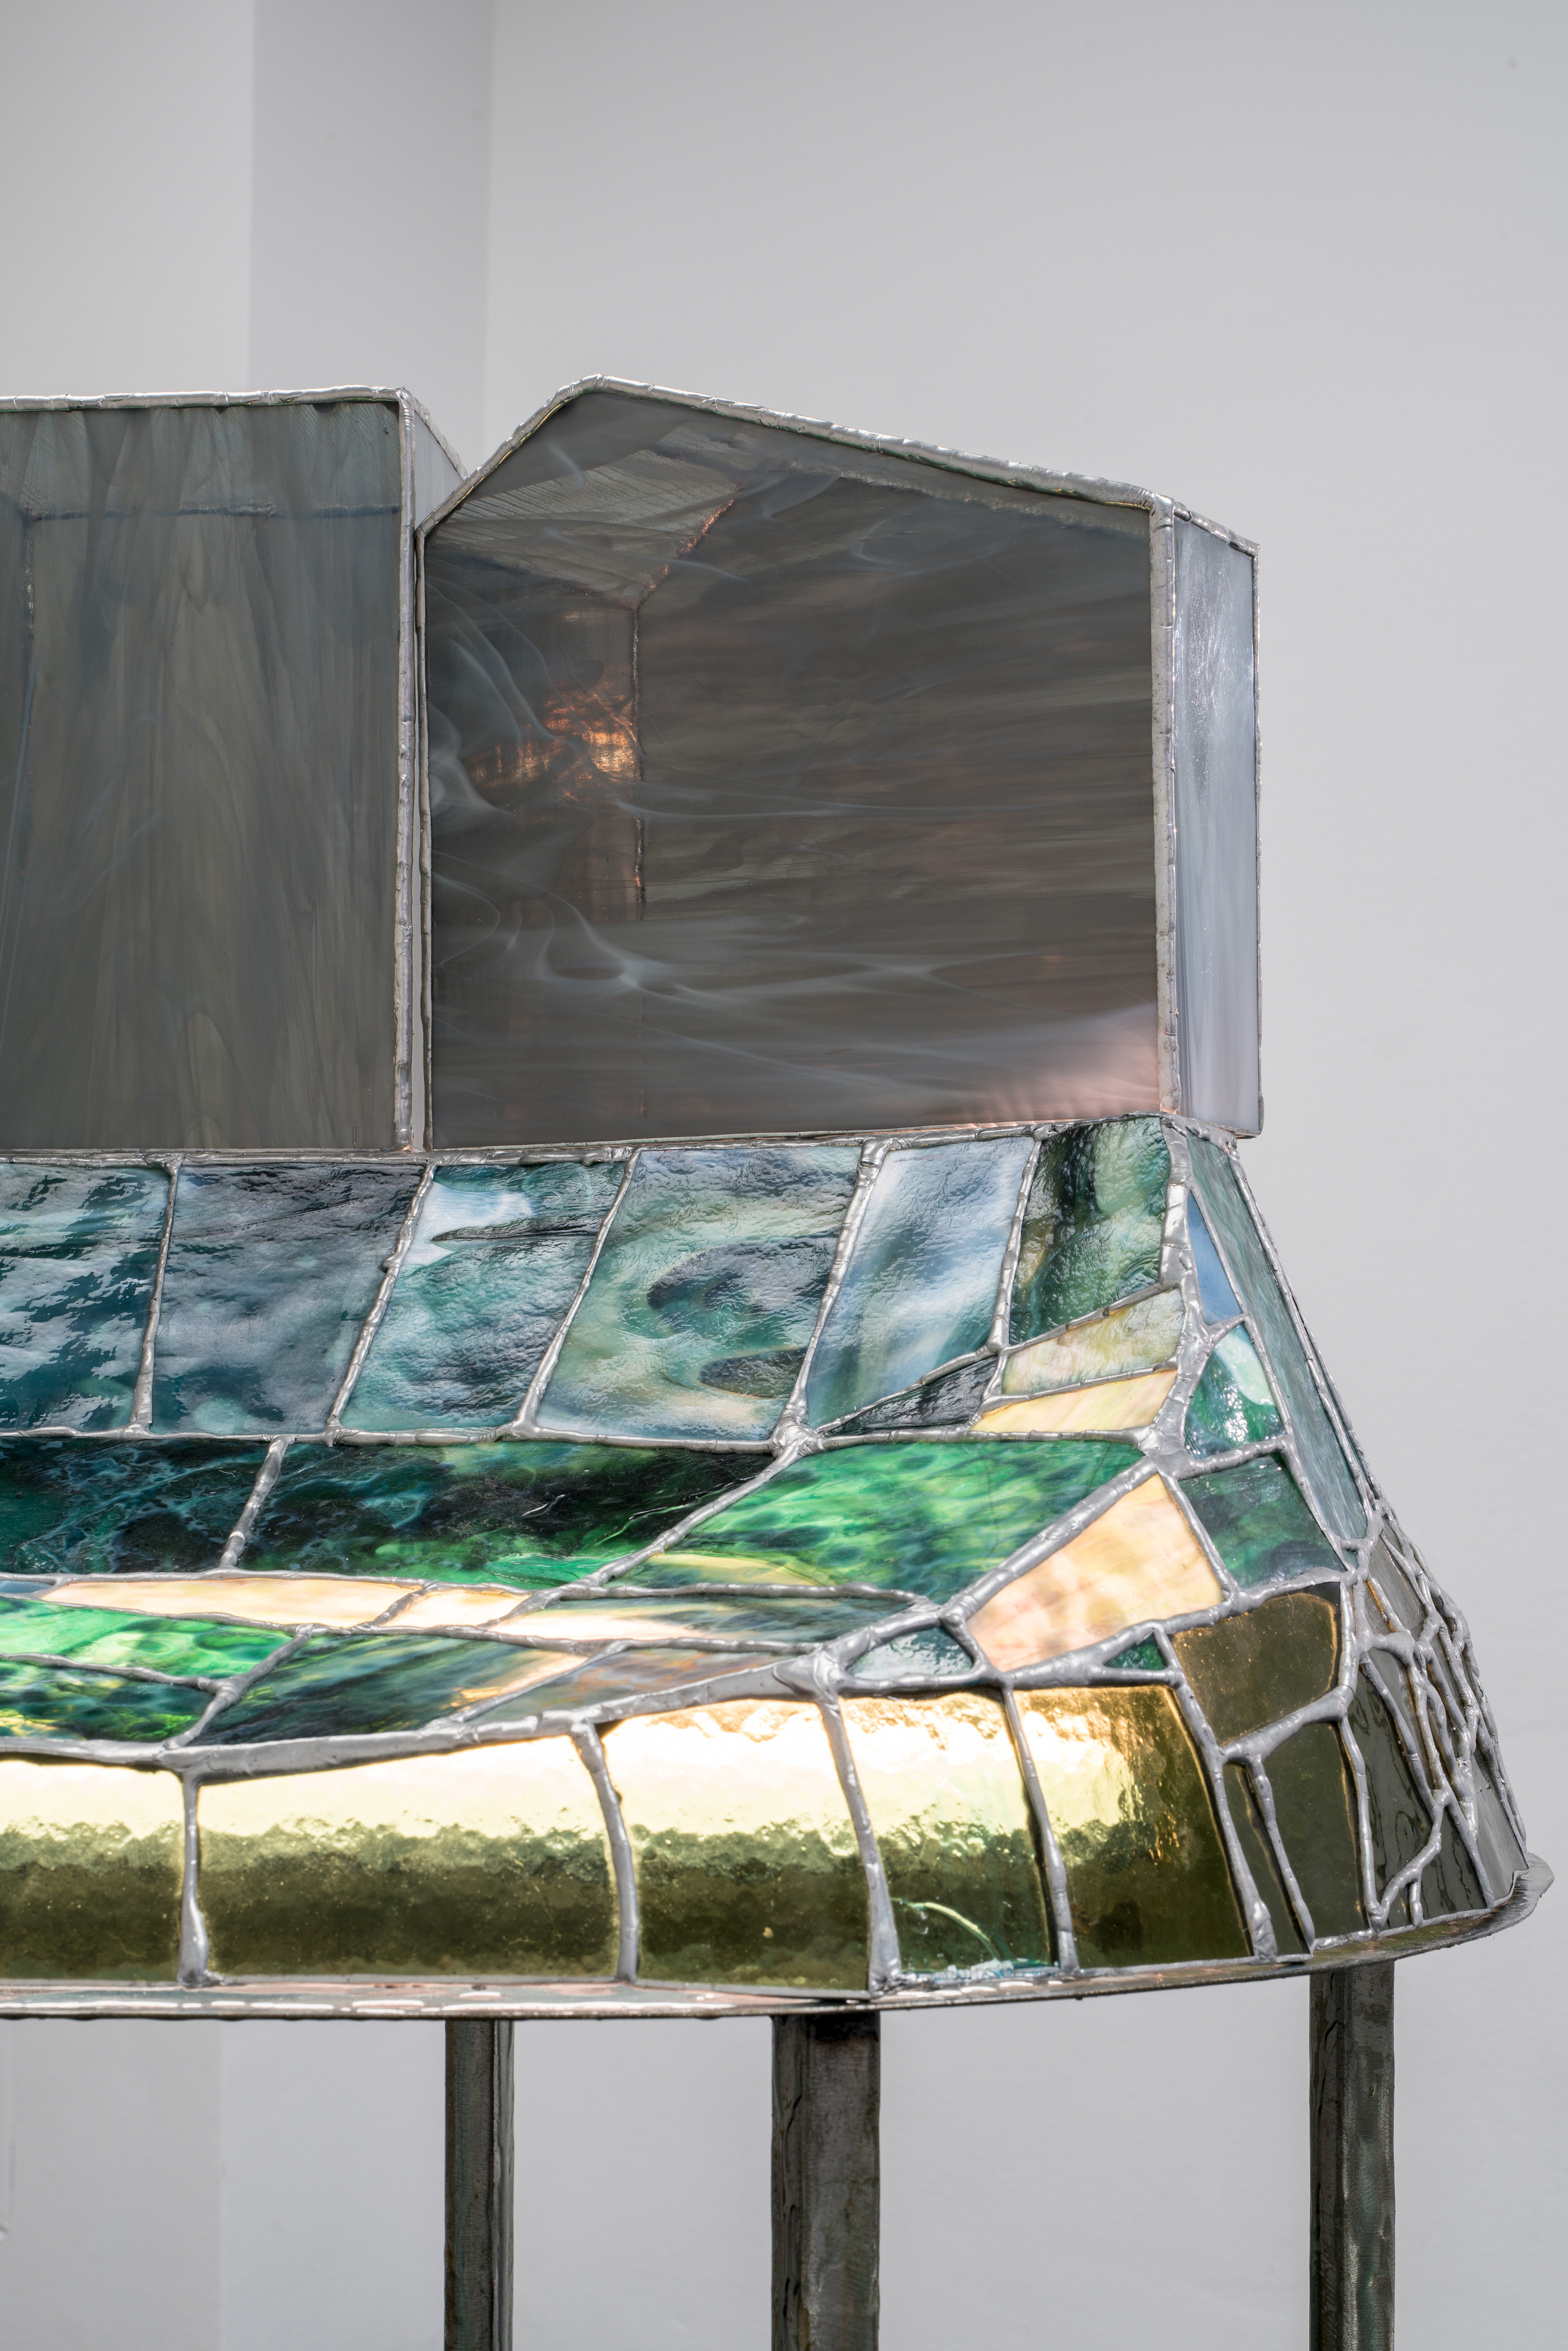 Tiril Hasselknippe, The Unfolding (table) (detail), 2021, Stained glass, tin, steel, light fixture, resin 49.21h × 48.42w × 22d in